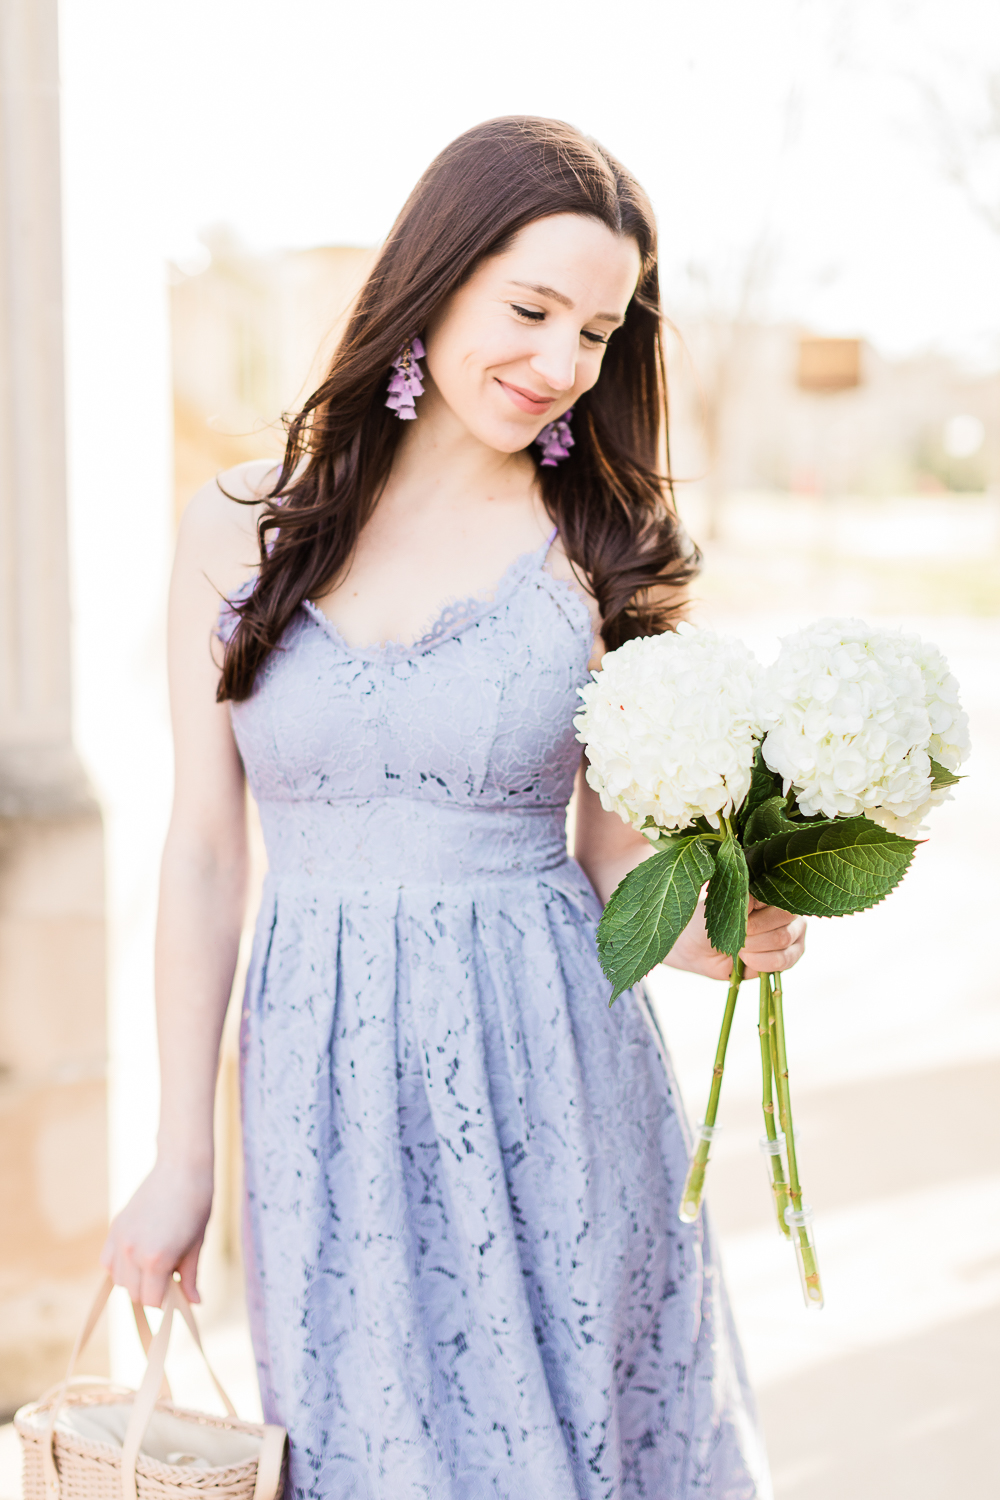 Best of March: The Top 10 Things I Loved in March 2019 by popular southern lifestyle blogger Stephanie Ziajka from Diary of a Debutante, chicwish lilac lace dress with white hydrangeas